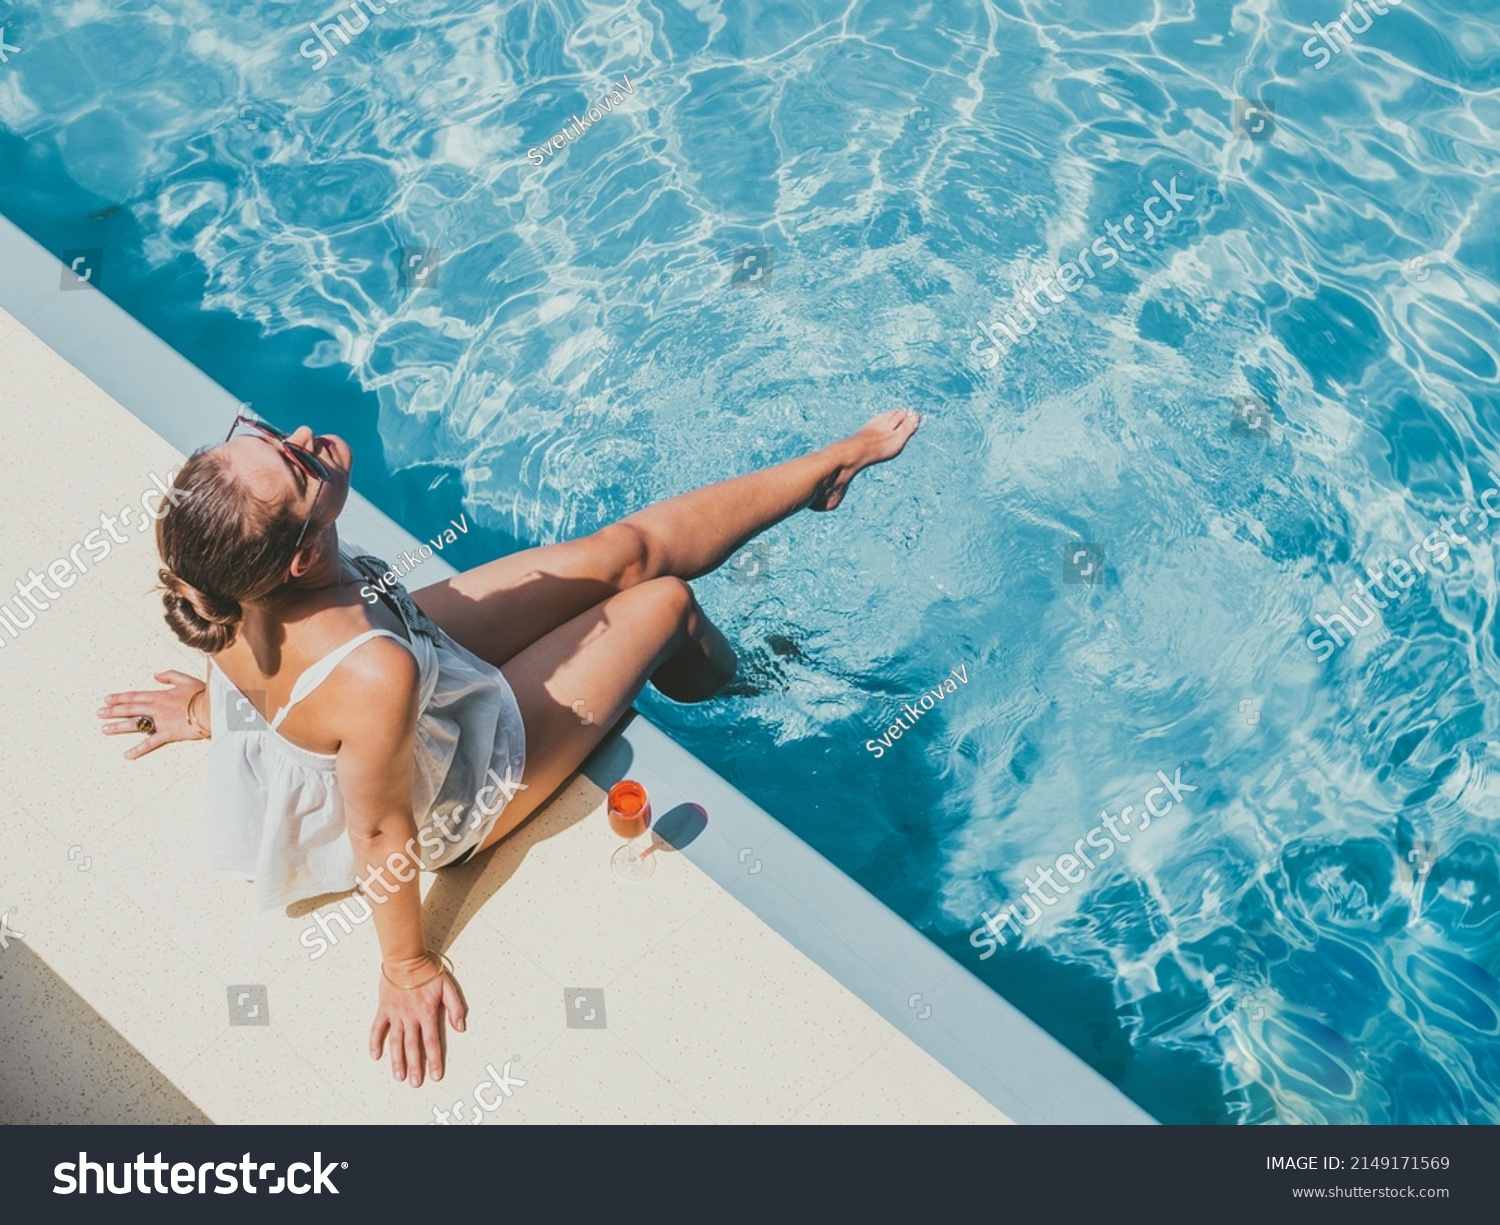 Fashionable woman sitting by the pool on the empty deck of a cruise liner. Closeup, outdoor, view from above. Vacation and travel concept #2149171569